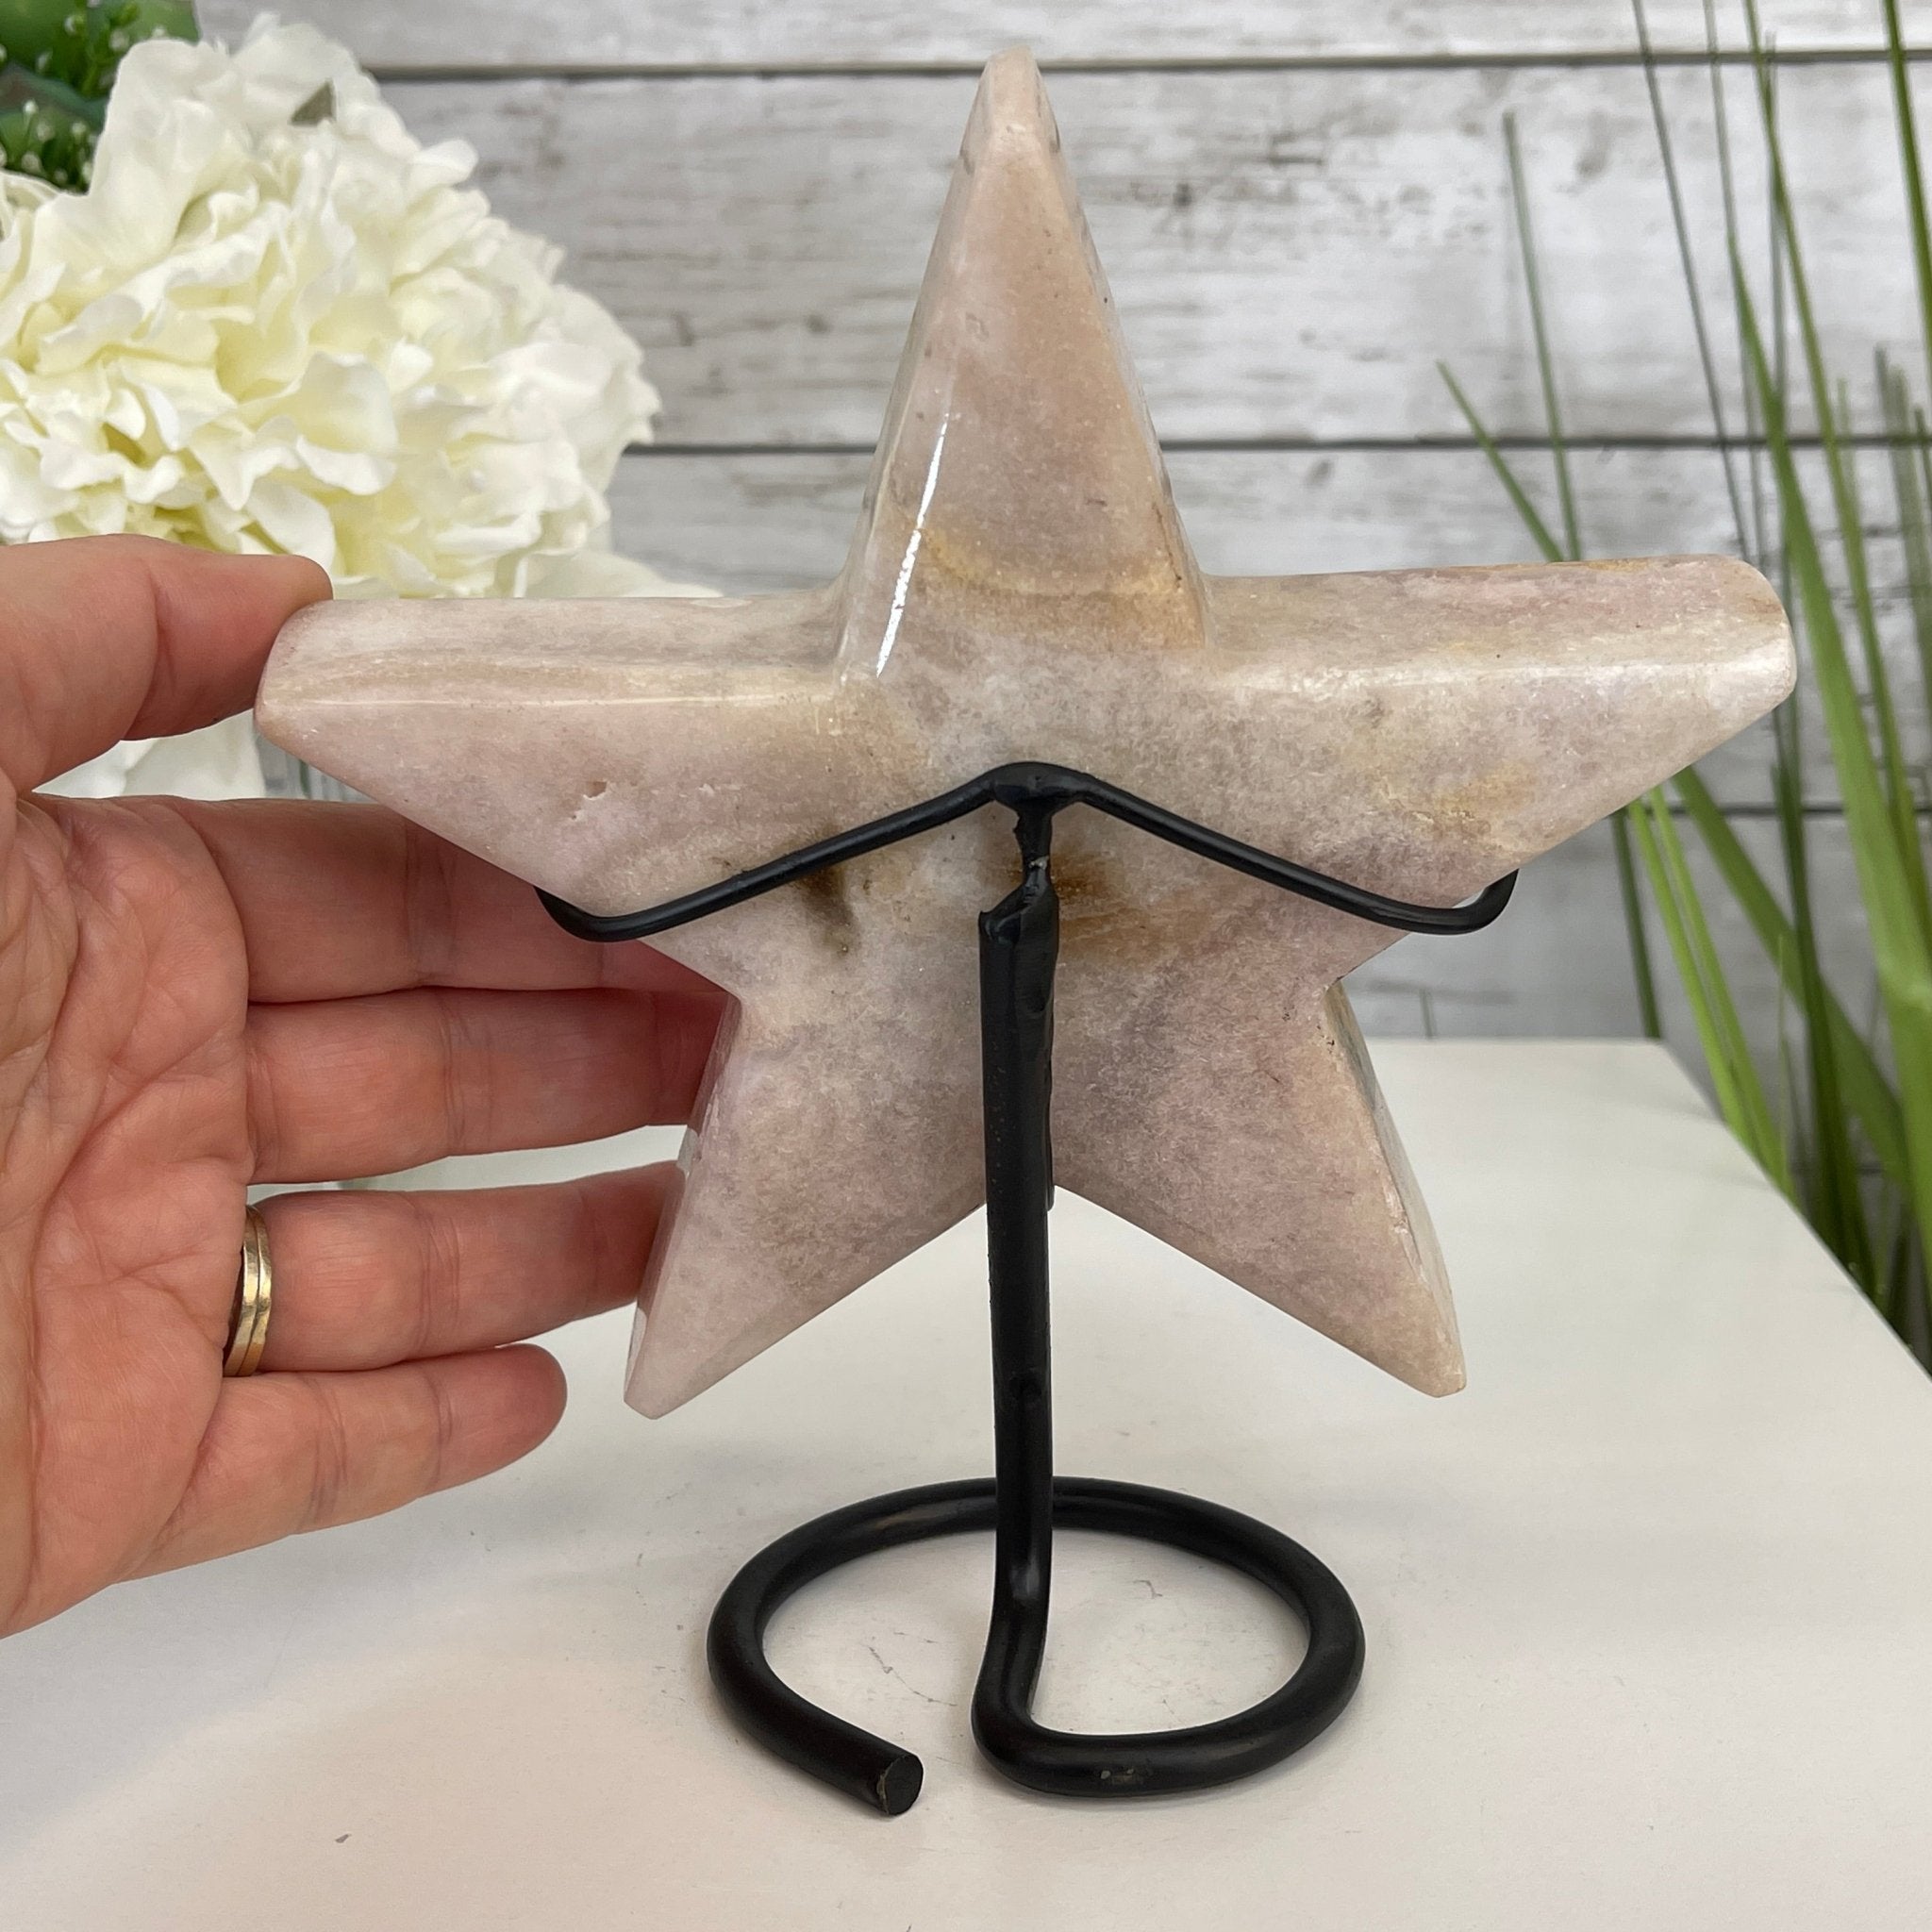 Pink Amethyst Star on a Metal Stand 7.5" Tall #5746-0009 by Brazil Gems - Brazil GemsBrazil GemsPink Amethyst Star on a Metal Stand 7.5" Tall #5746-0009 by Brazil GemsStars5746-0009